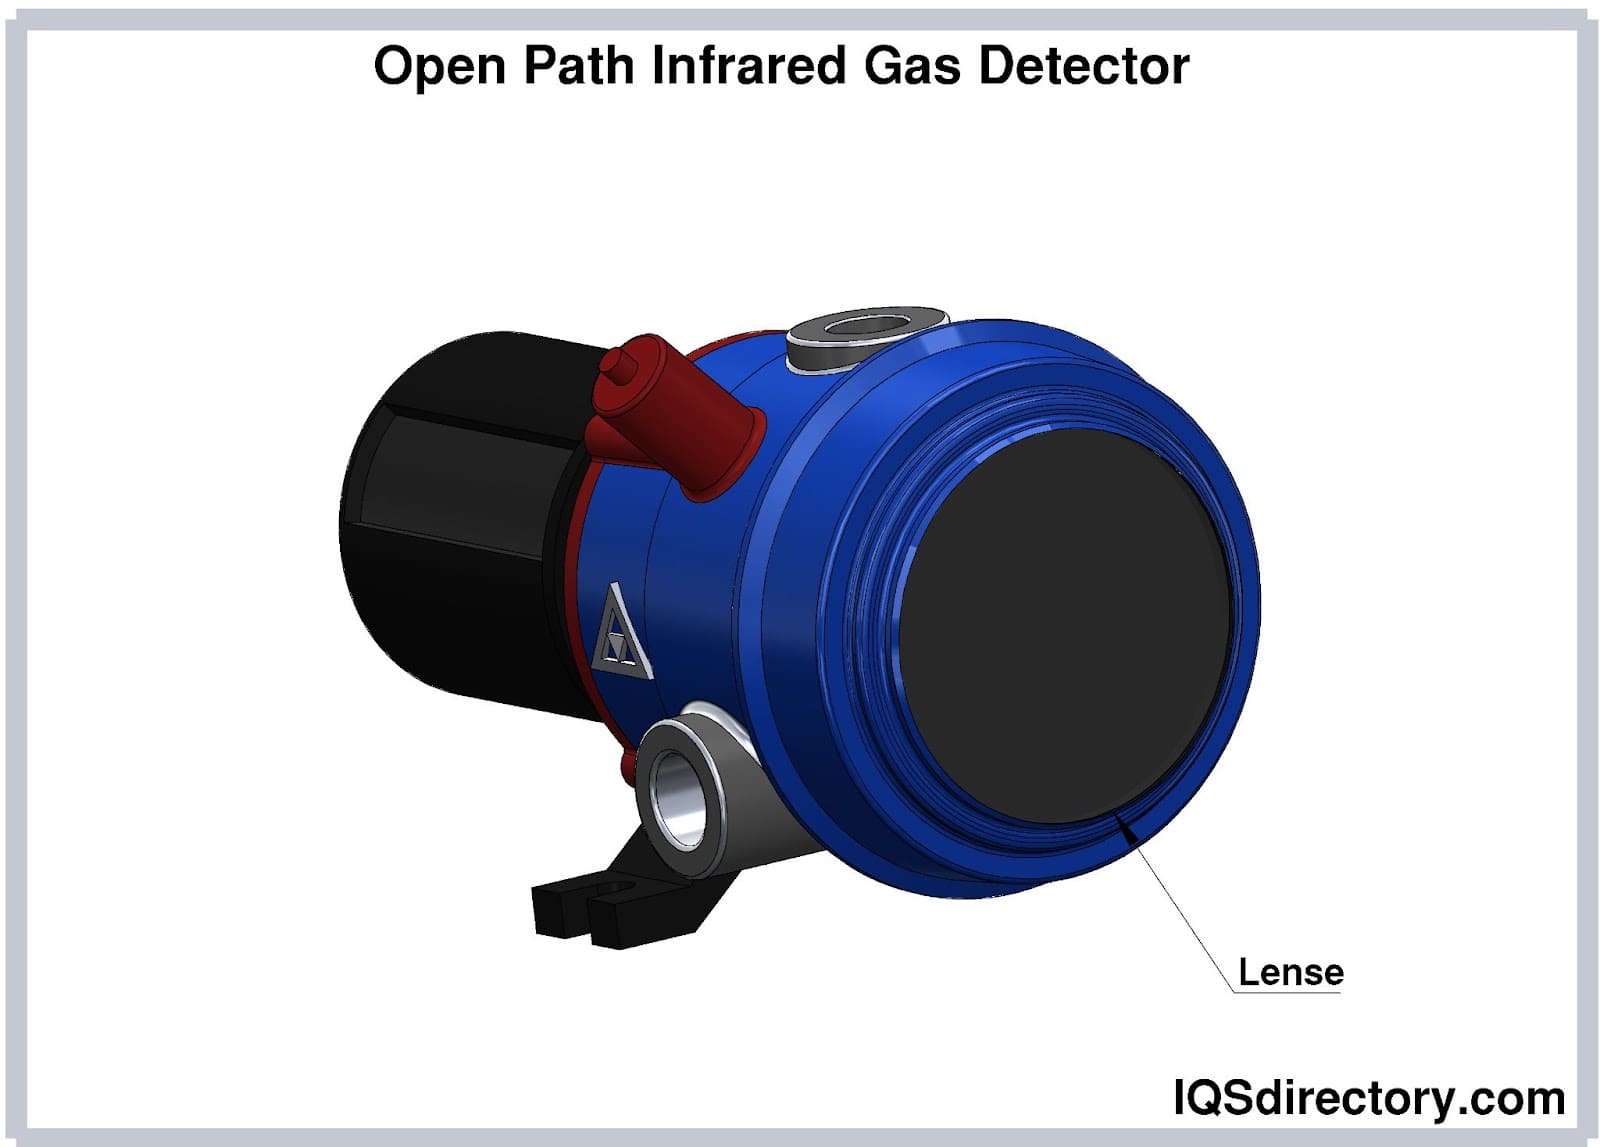 Open Path Infrared Gas Detector